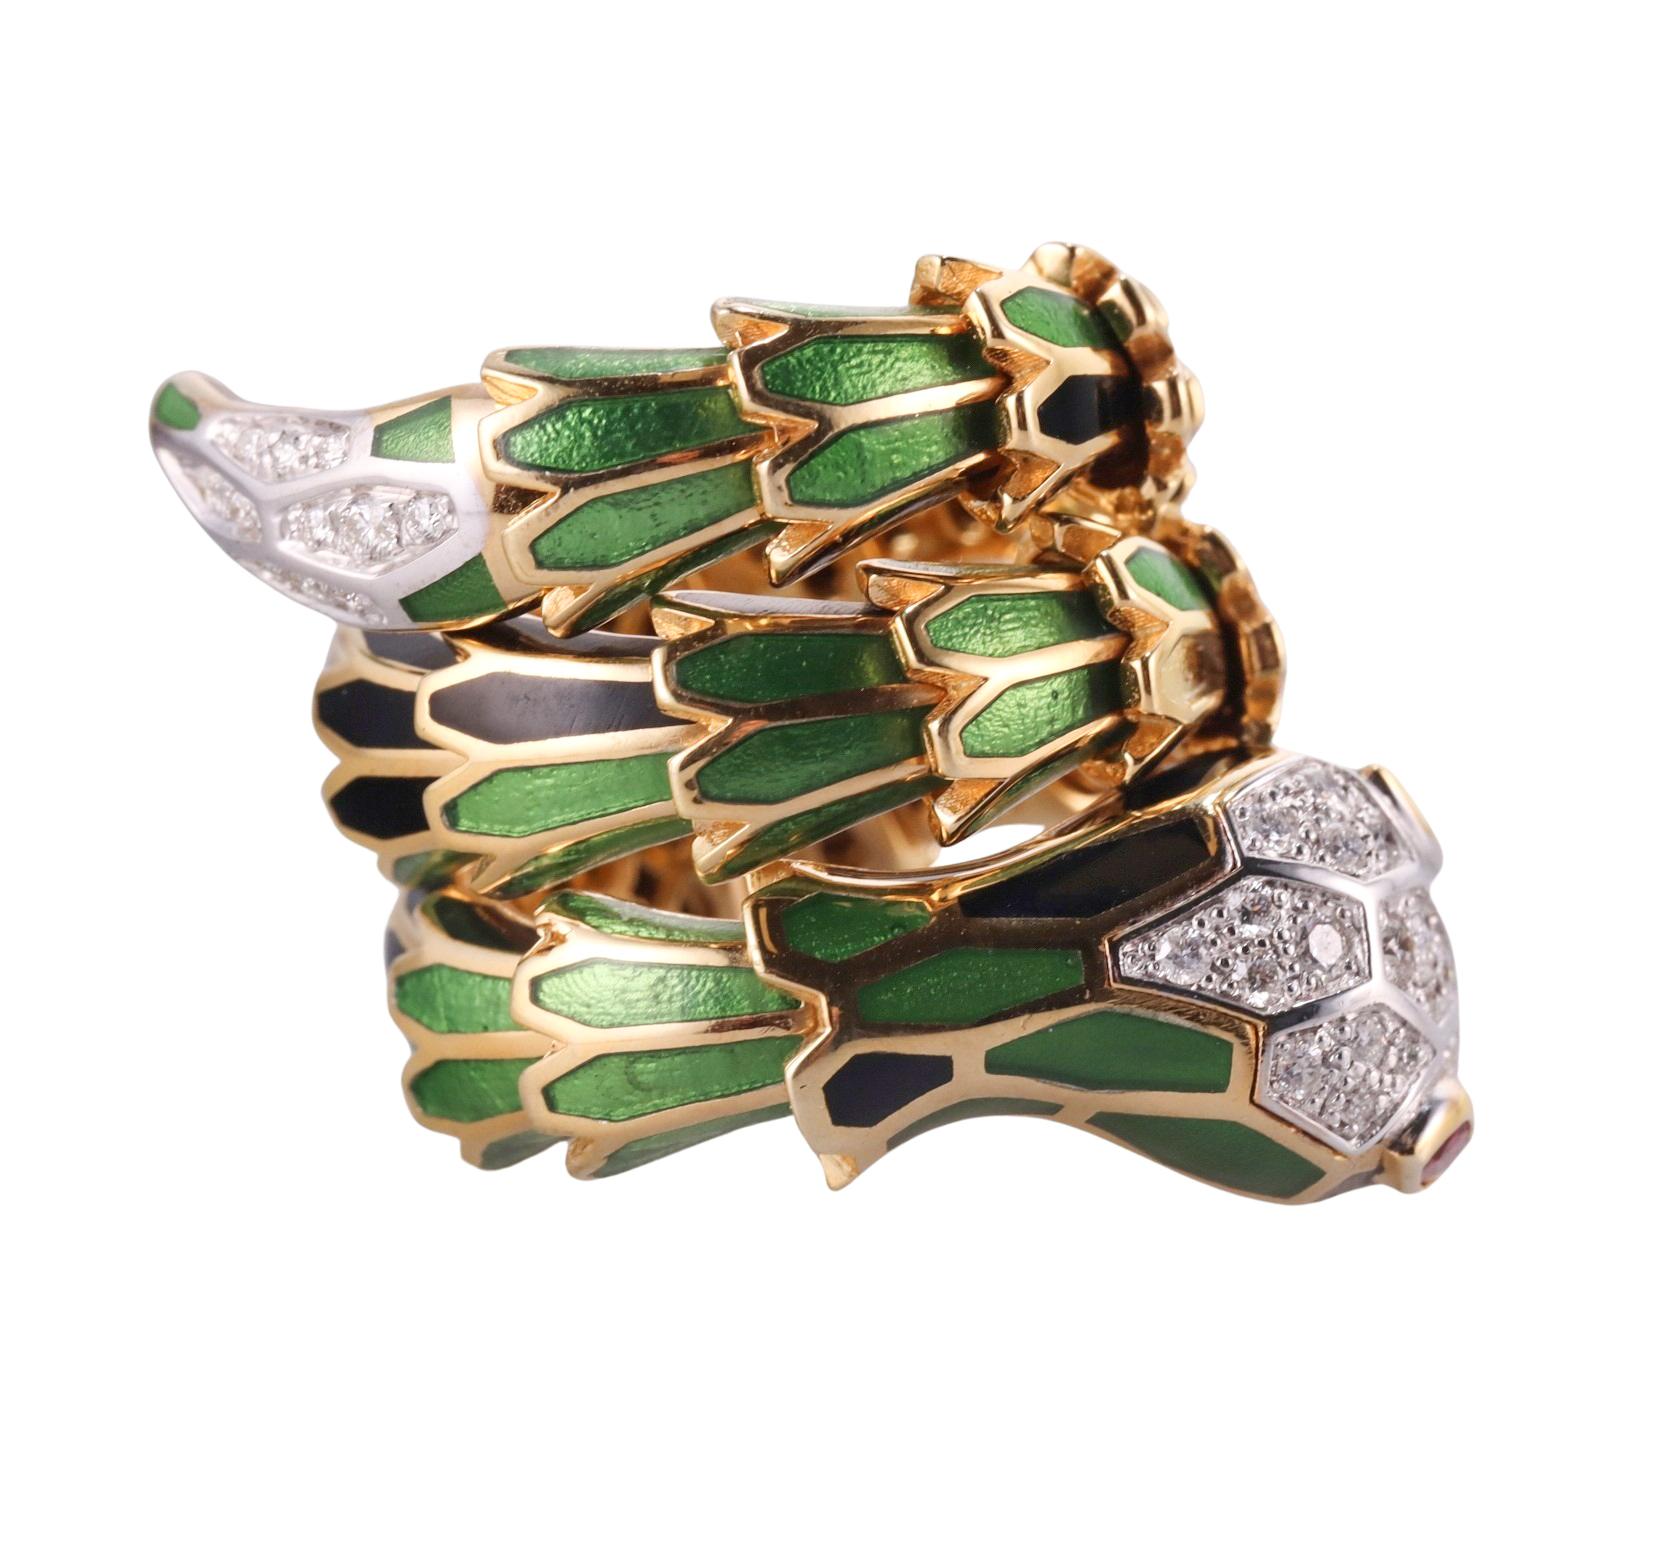 Impressive snake wrap ring, crafted by Alexis NY, set in 18k gold over sterling silver, adorned with vibrant enamel, 0.32ctw G/VS diamonds and 0.20ctw rubies.  Ring size, 5.75 (slightly flexible), width 1